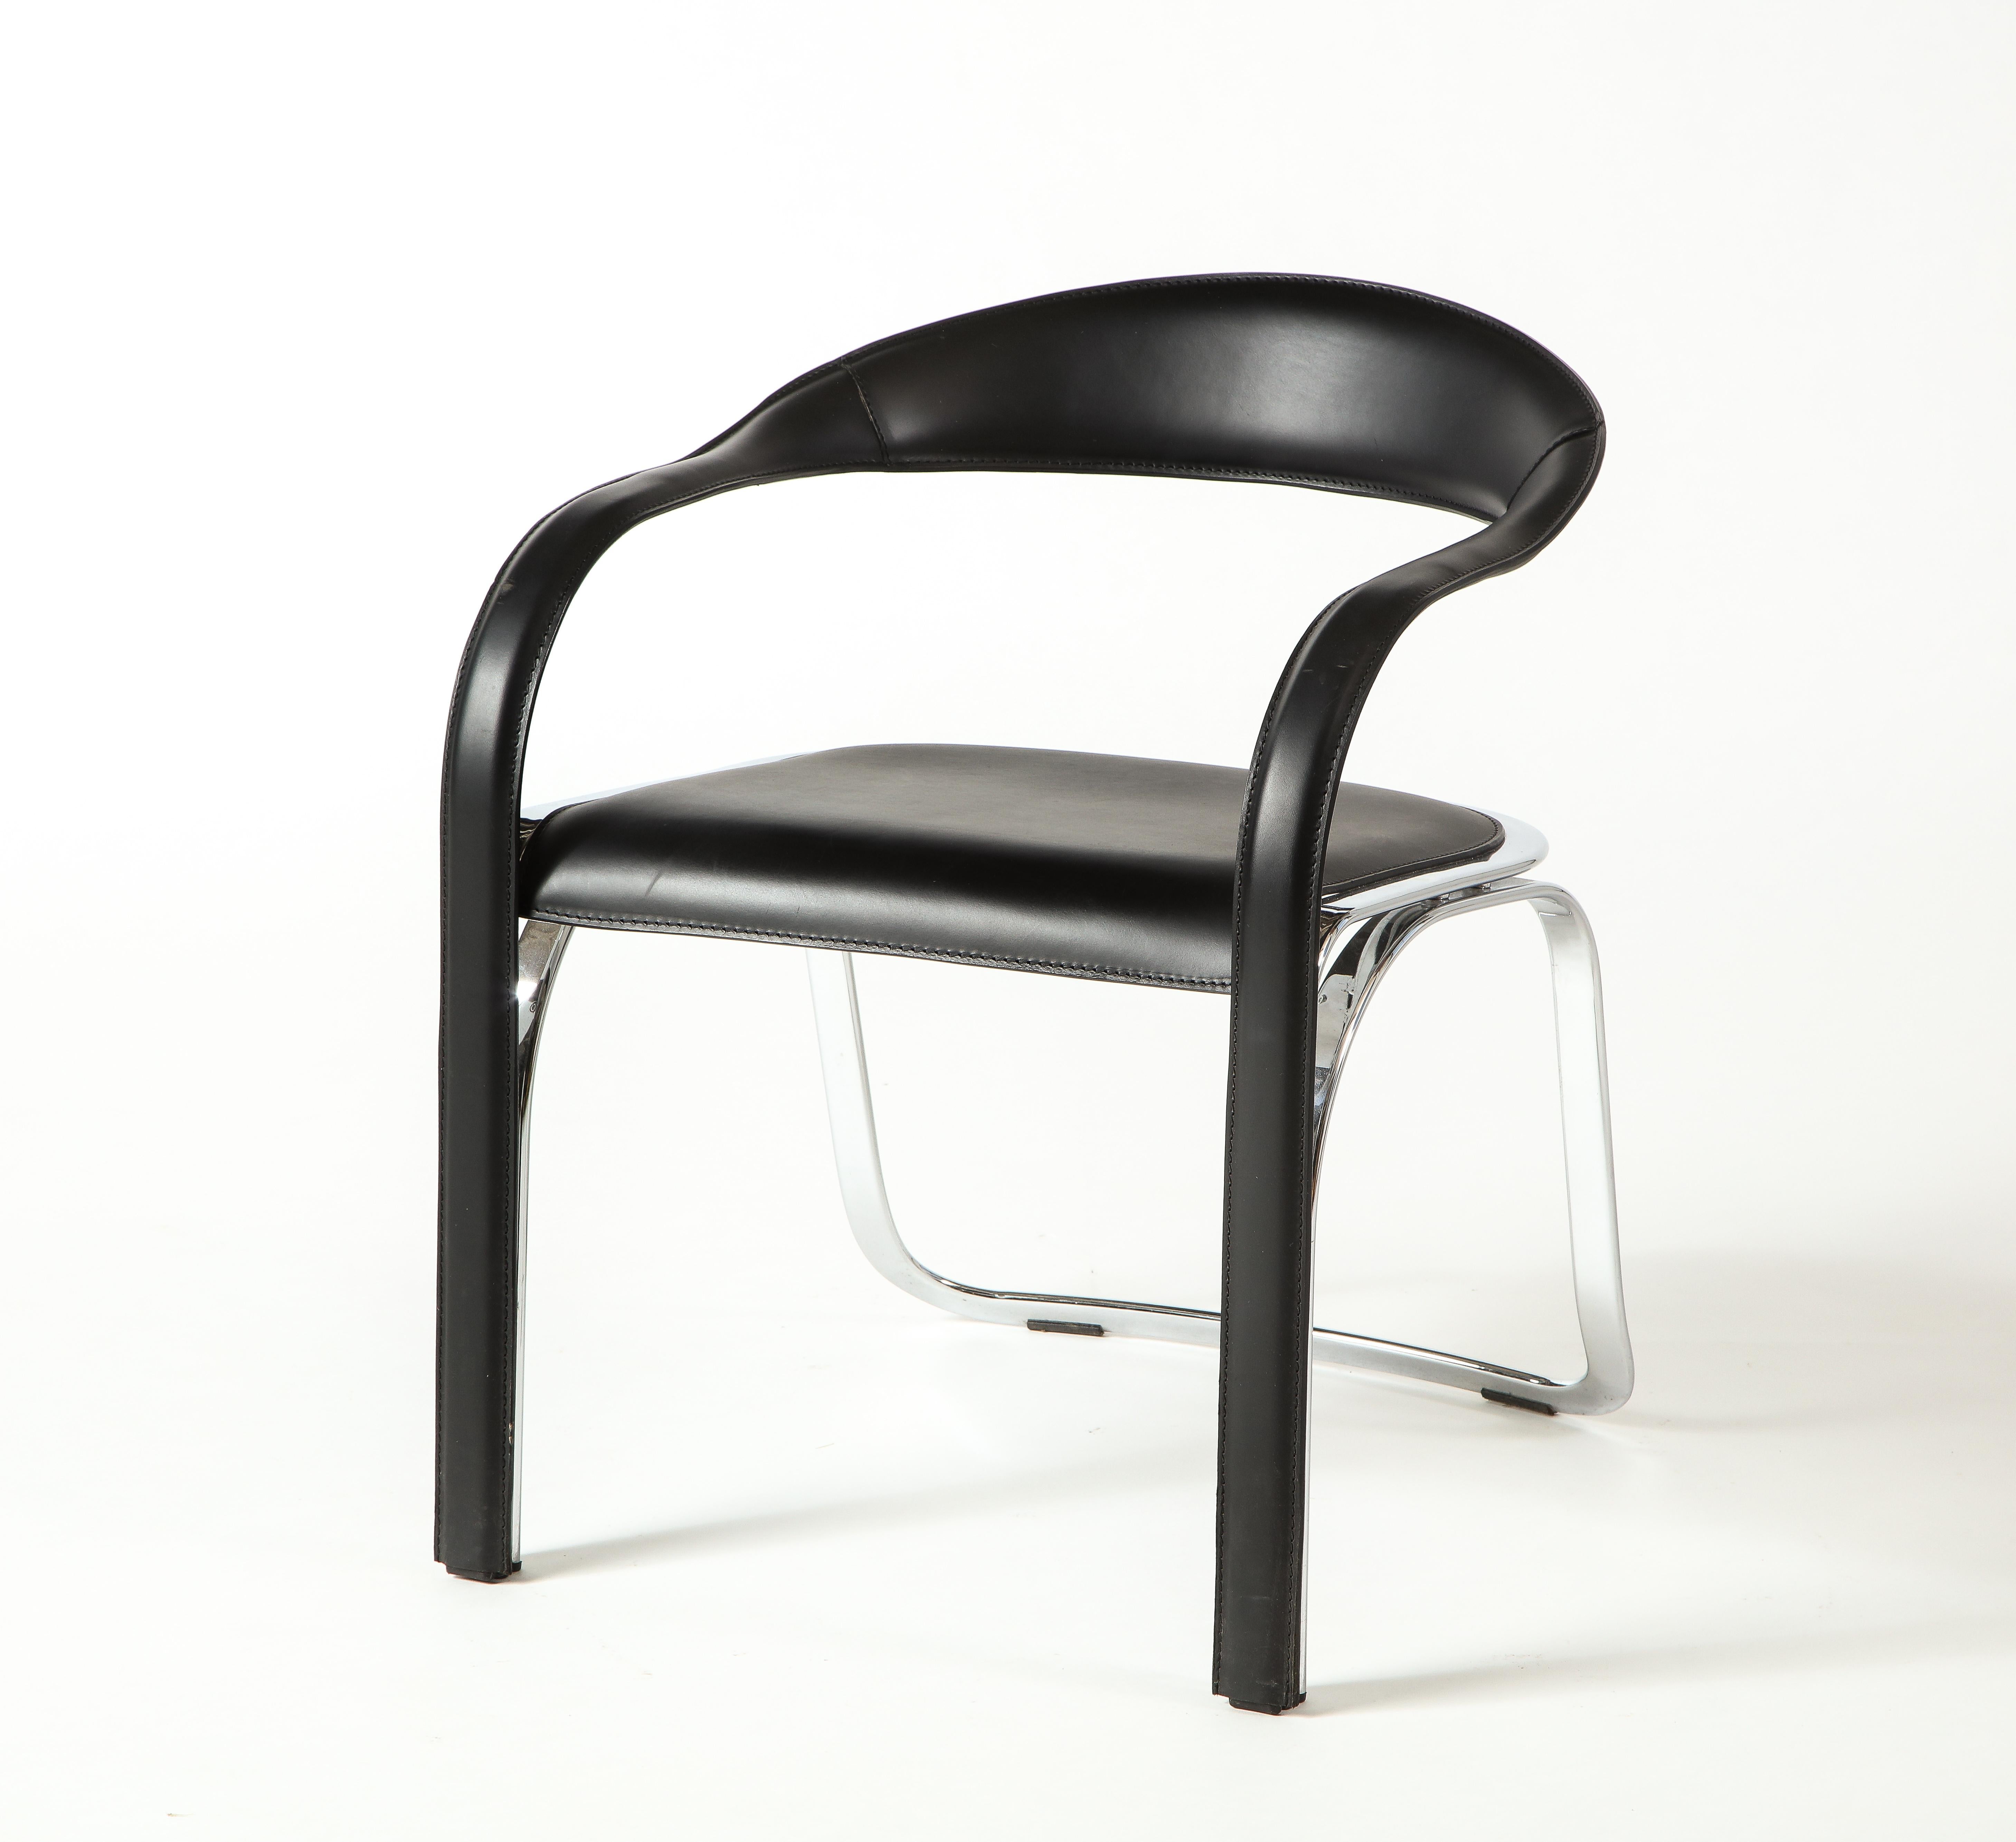 The kinetic lines of the Fettucini Chair fold together and gracefully join along the legs, drawing the eye across each contour.The floating backrest flows into twisting curves of the arms, with a precision reflecting the rigorous intention in